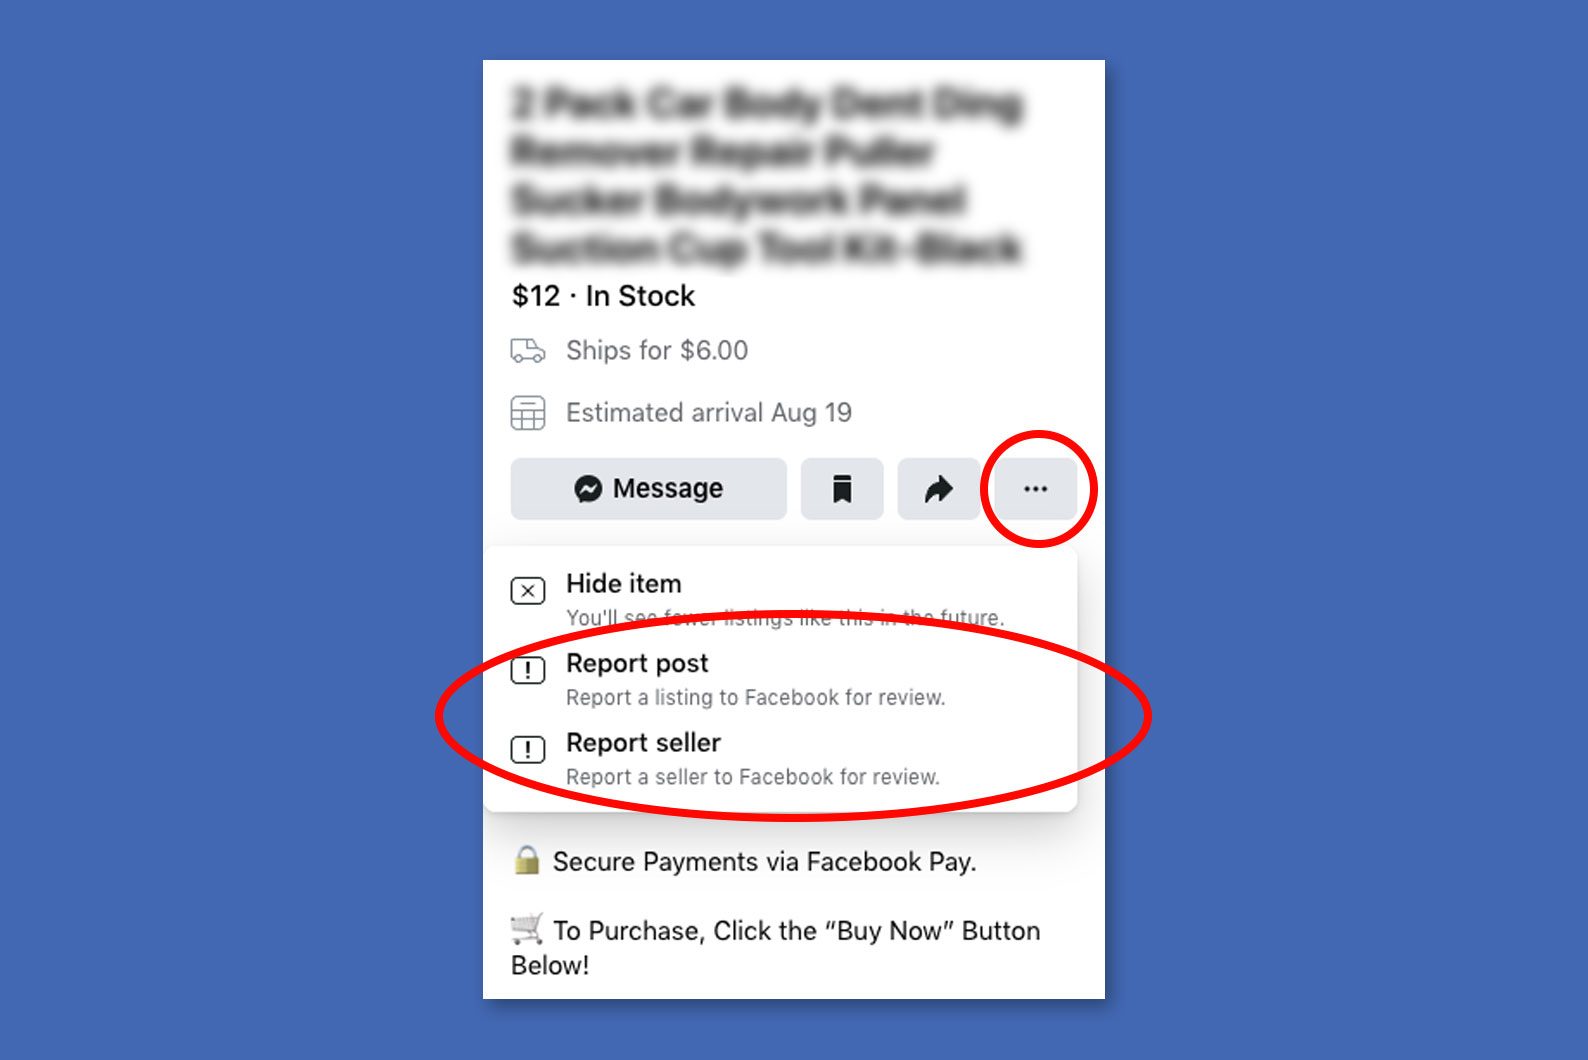 10 Facebook Marketplace Scams to Watch Out for; How to Avoid, Report